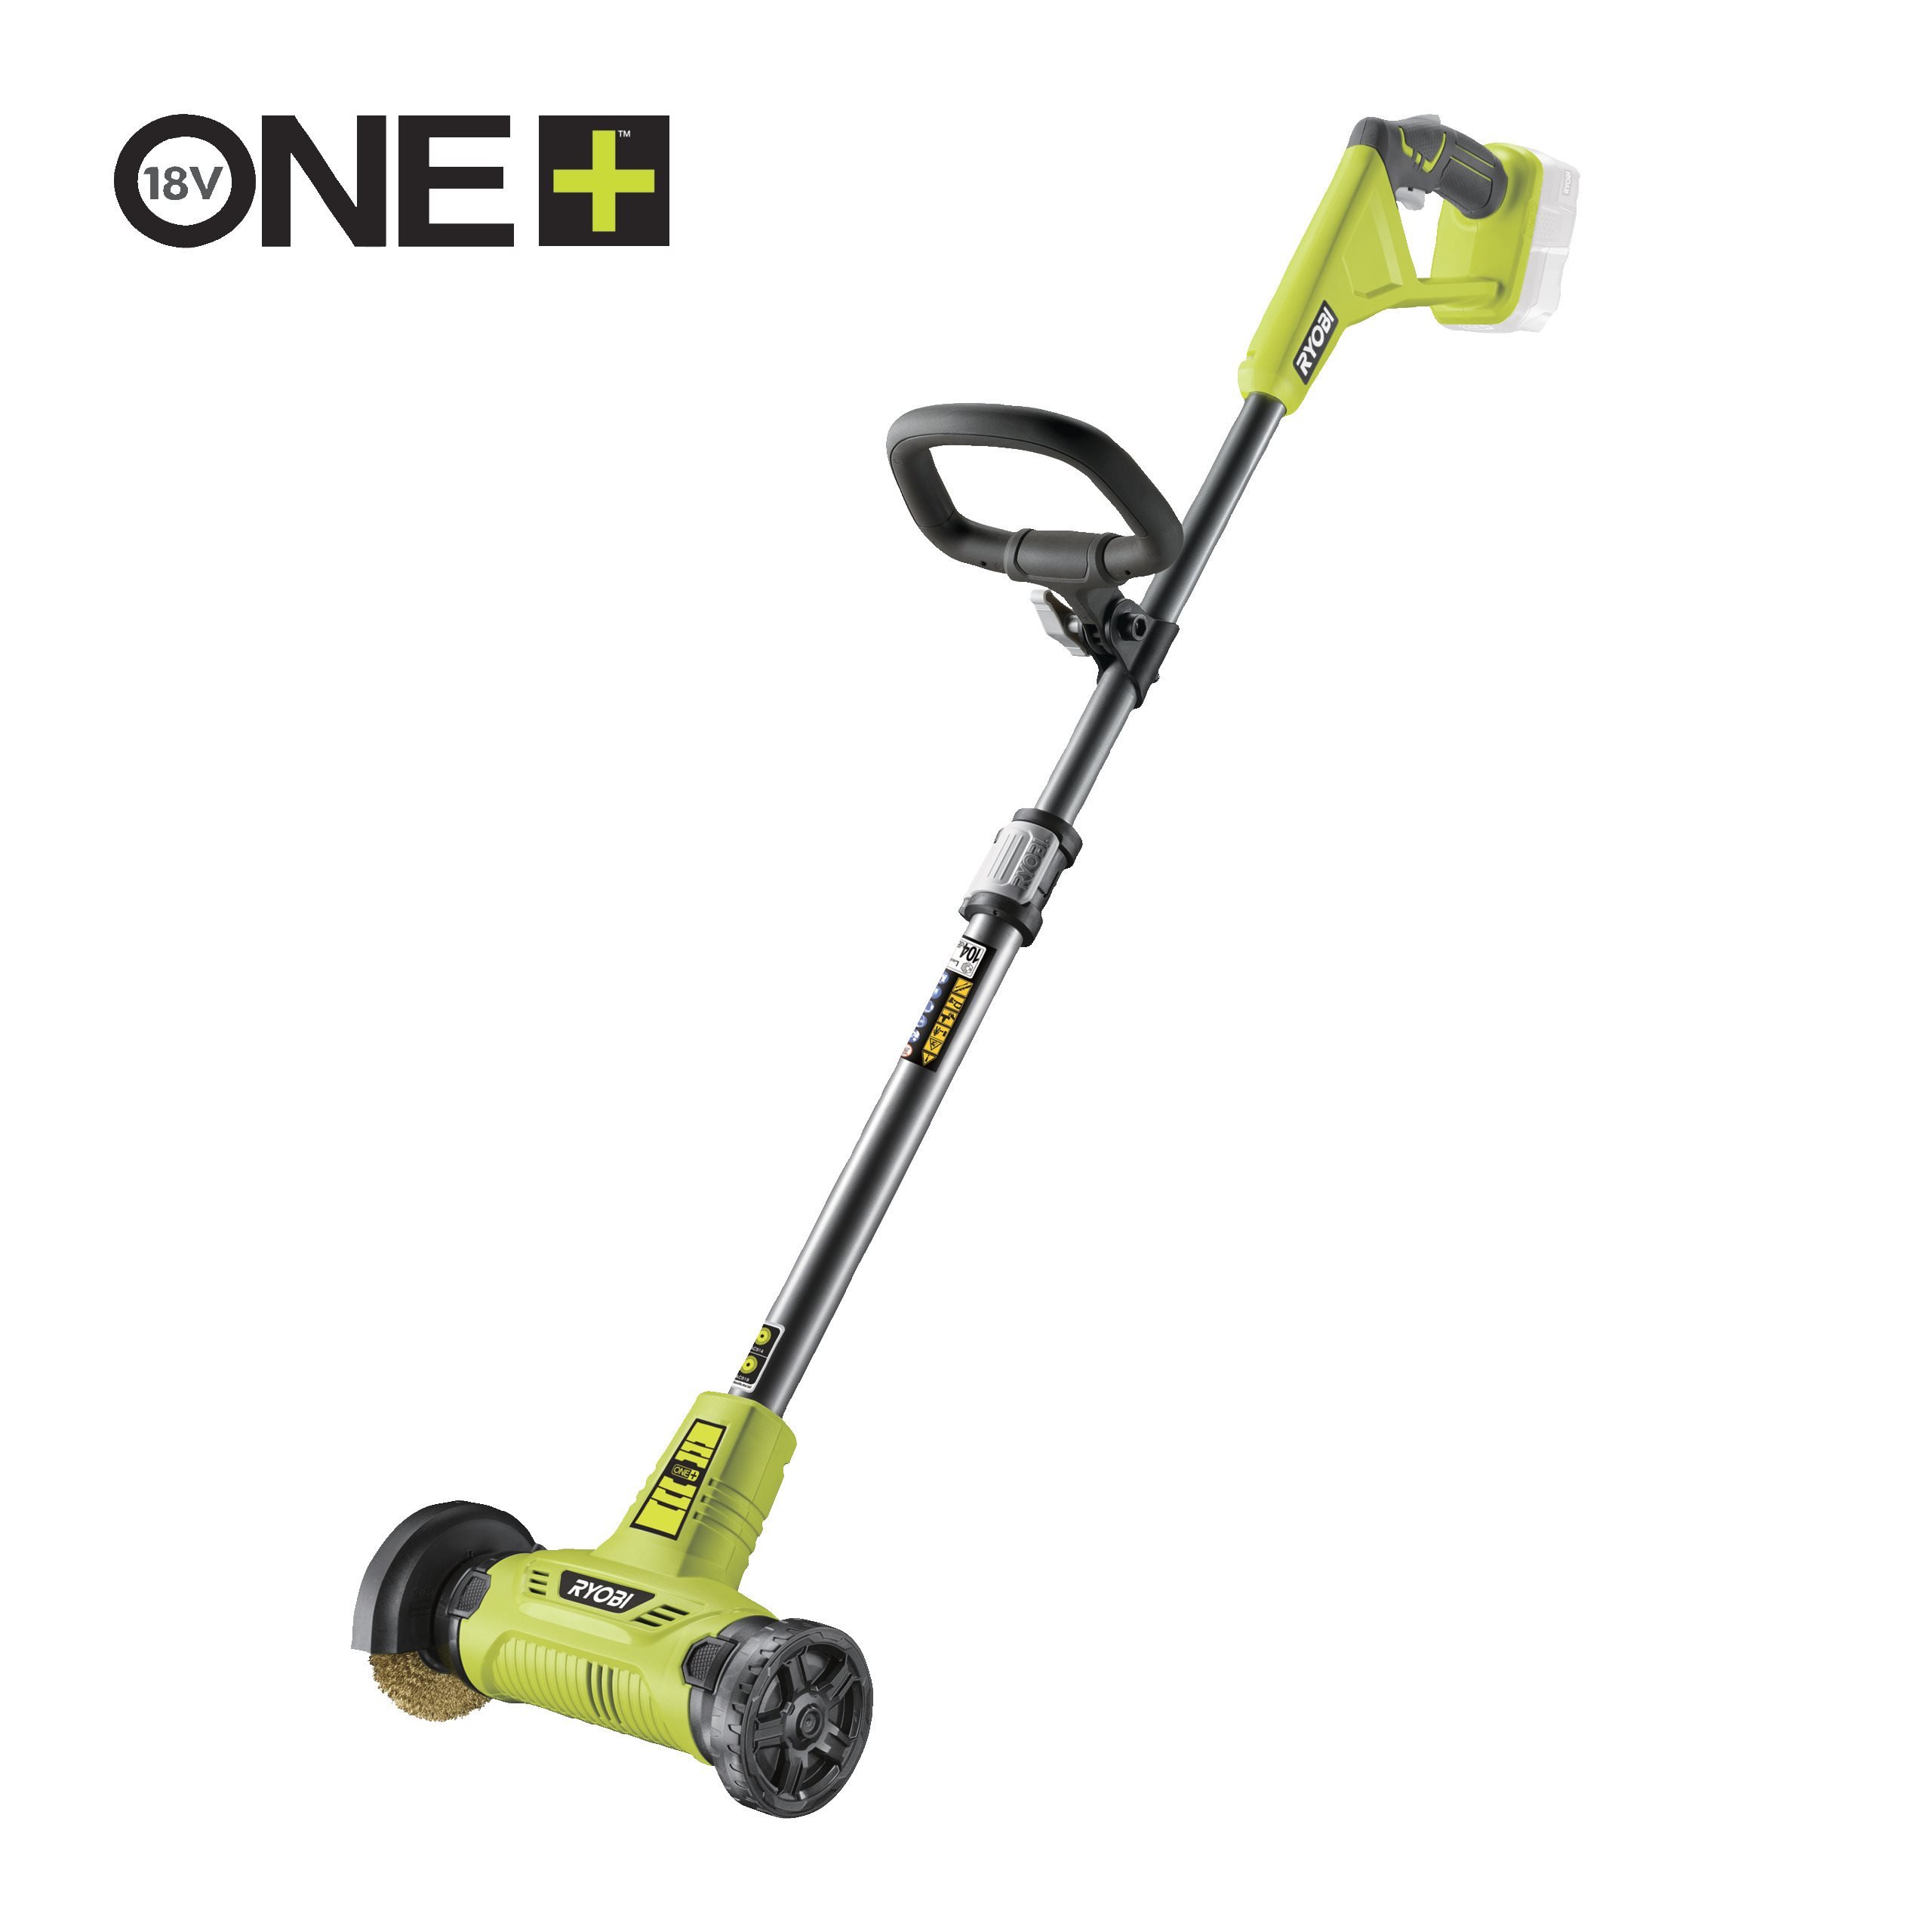 18V ONE+™ Cordless Patio Cleaner with Wire Brush (Bare Tool)